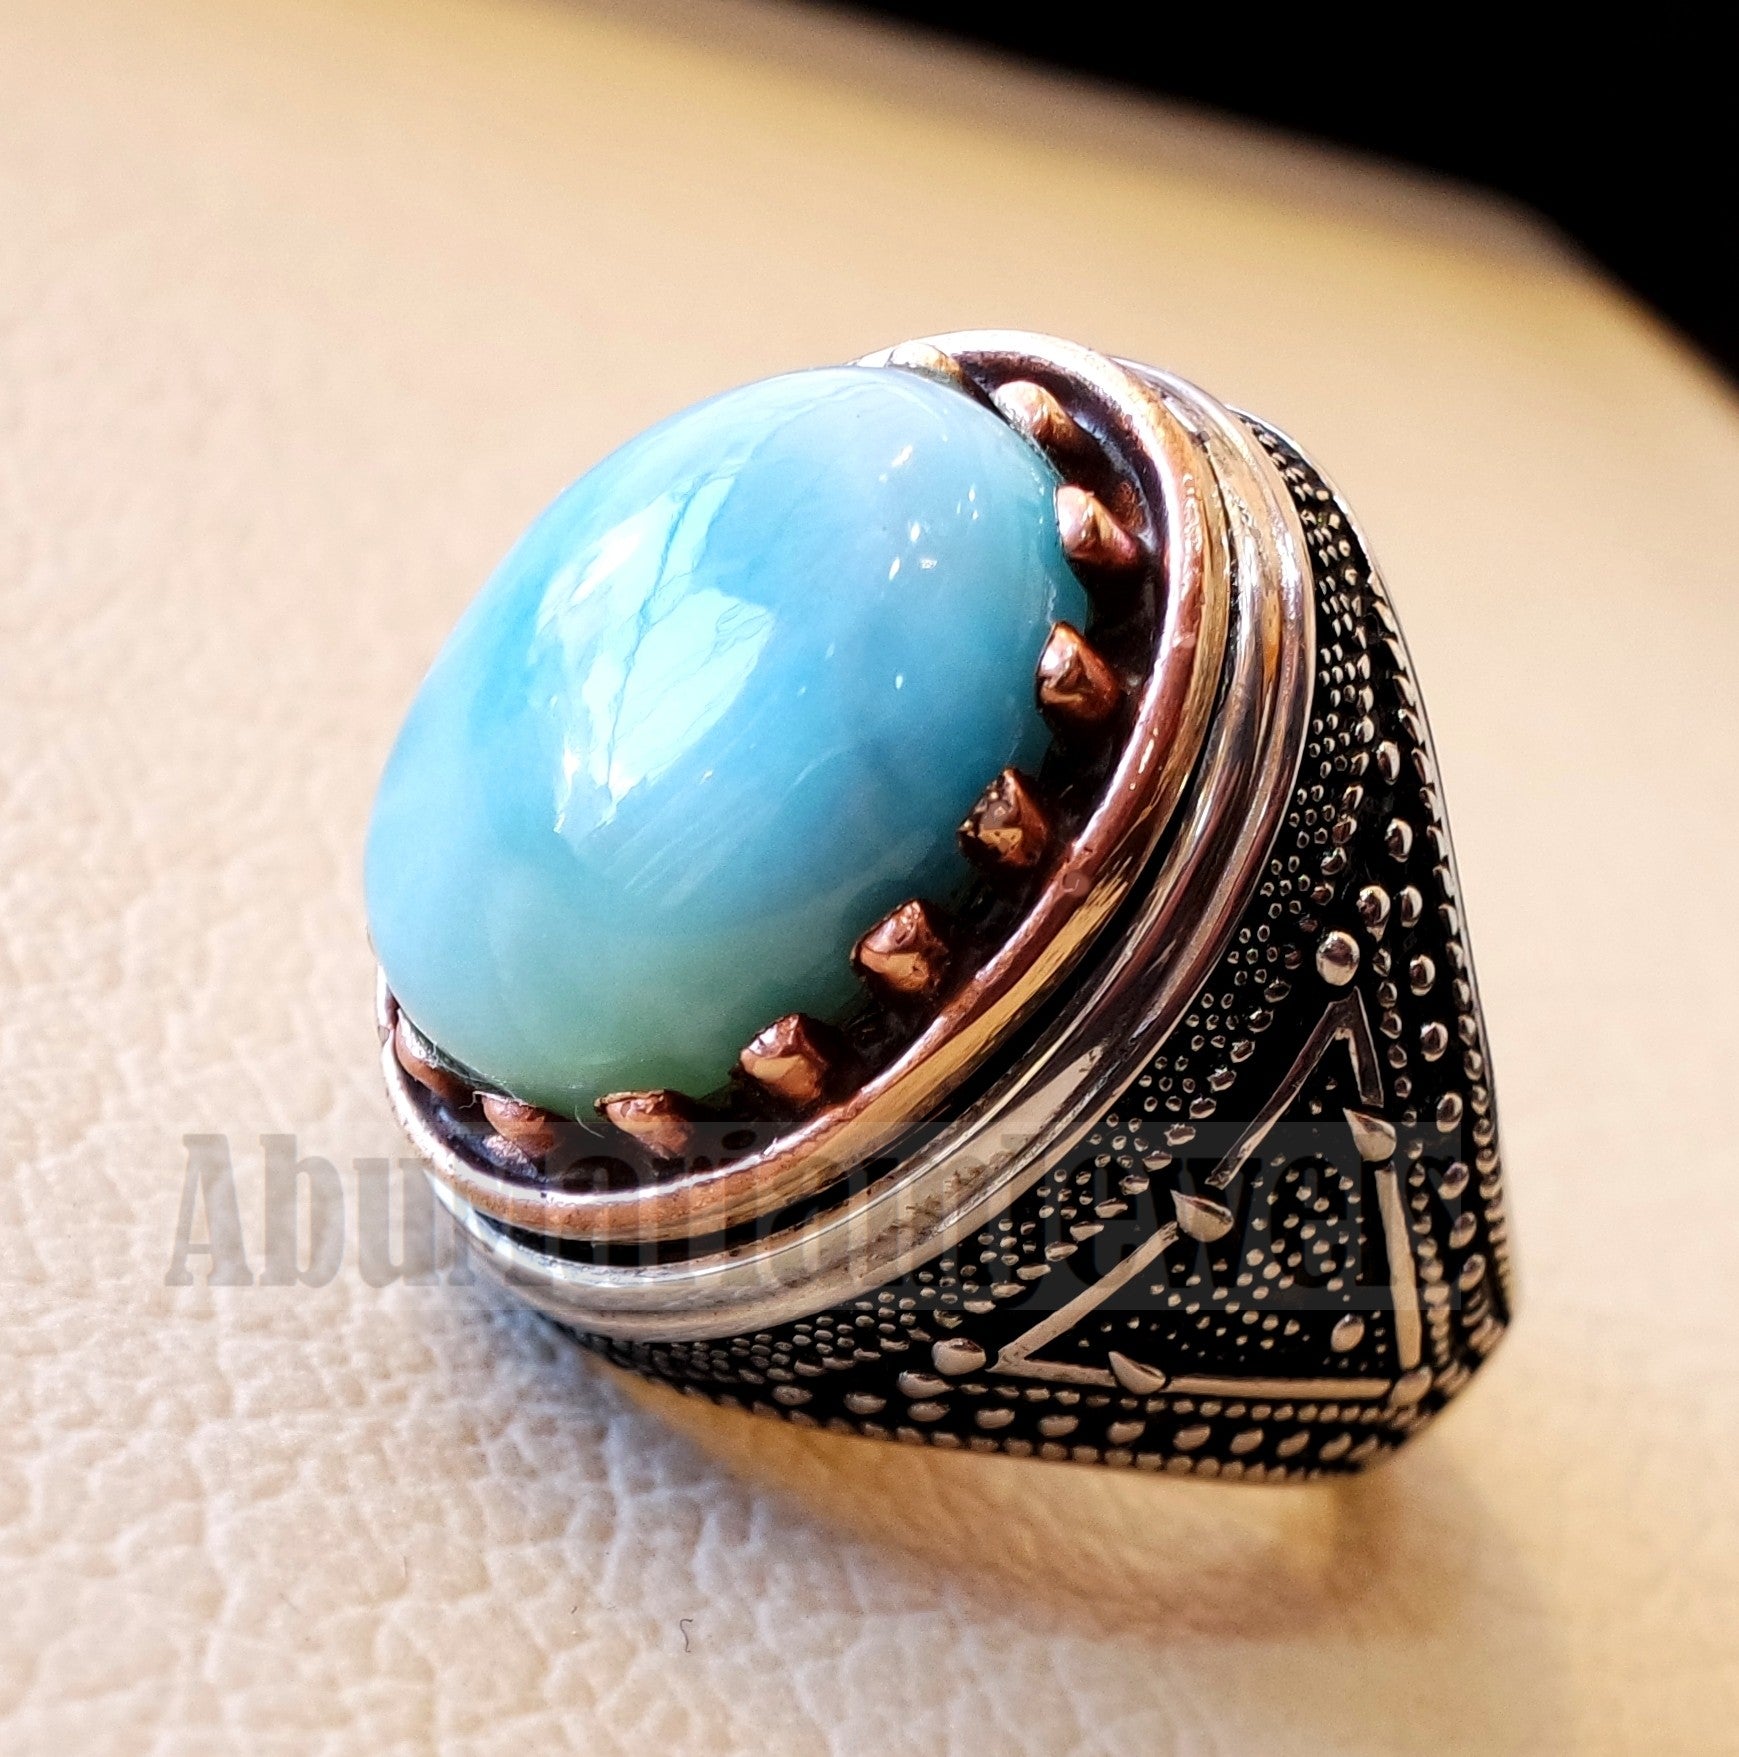 Dominican larimar blue natural stone ring sterling silver 925 and bronze frame men jewelry all sizes gem high quality middle eastern style